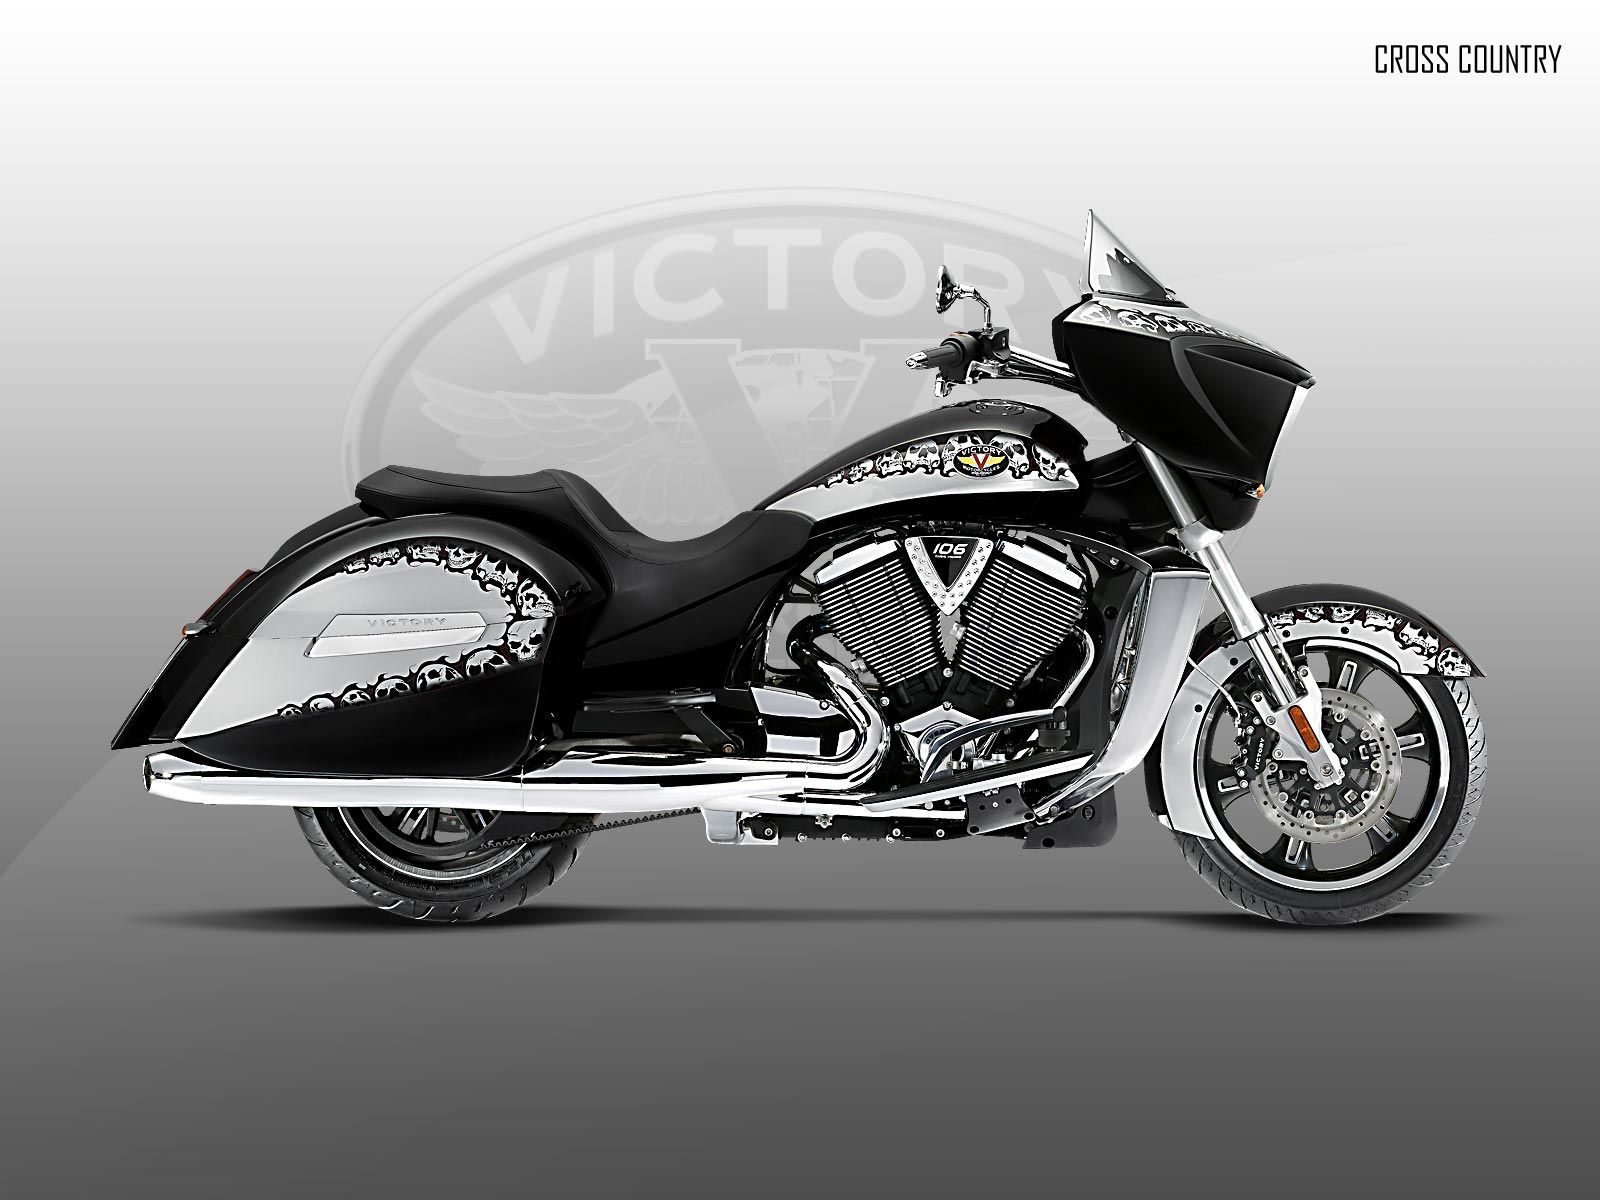  2010 Victory Cross Country